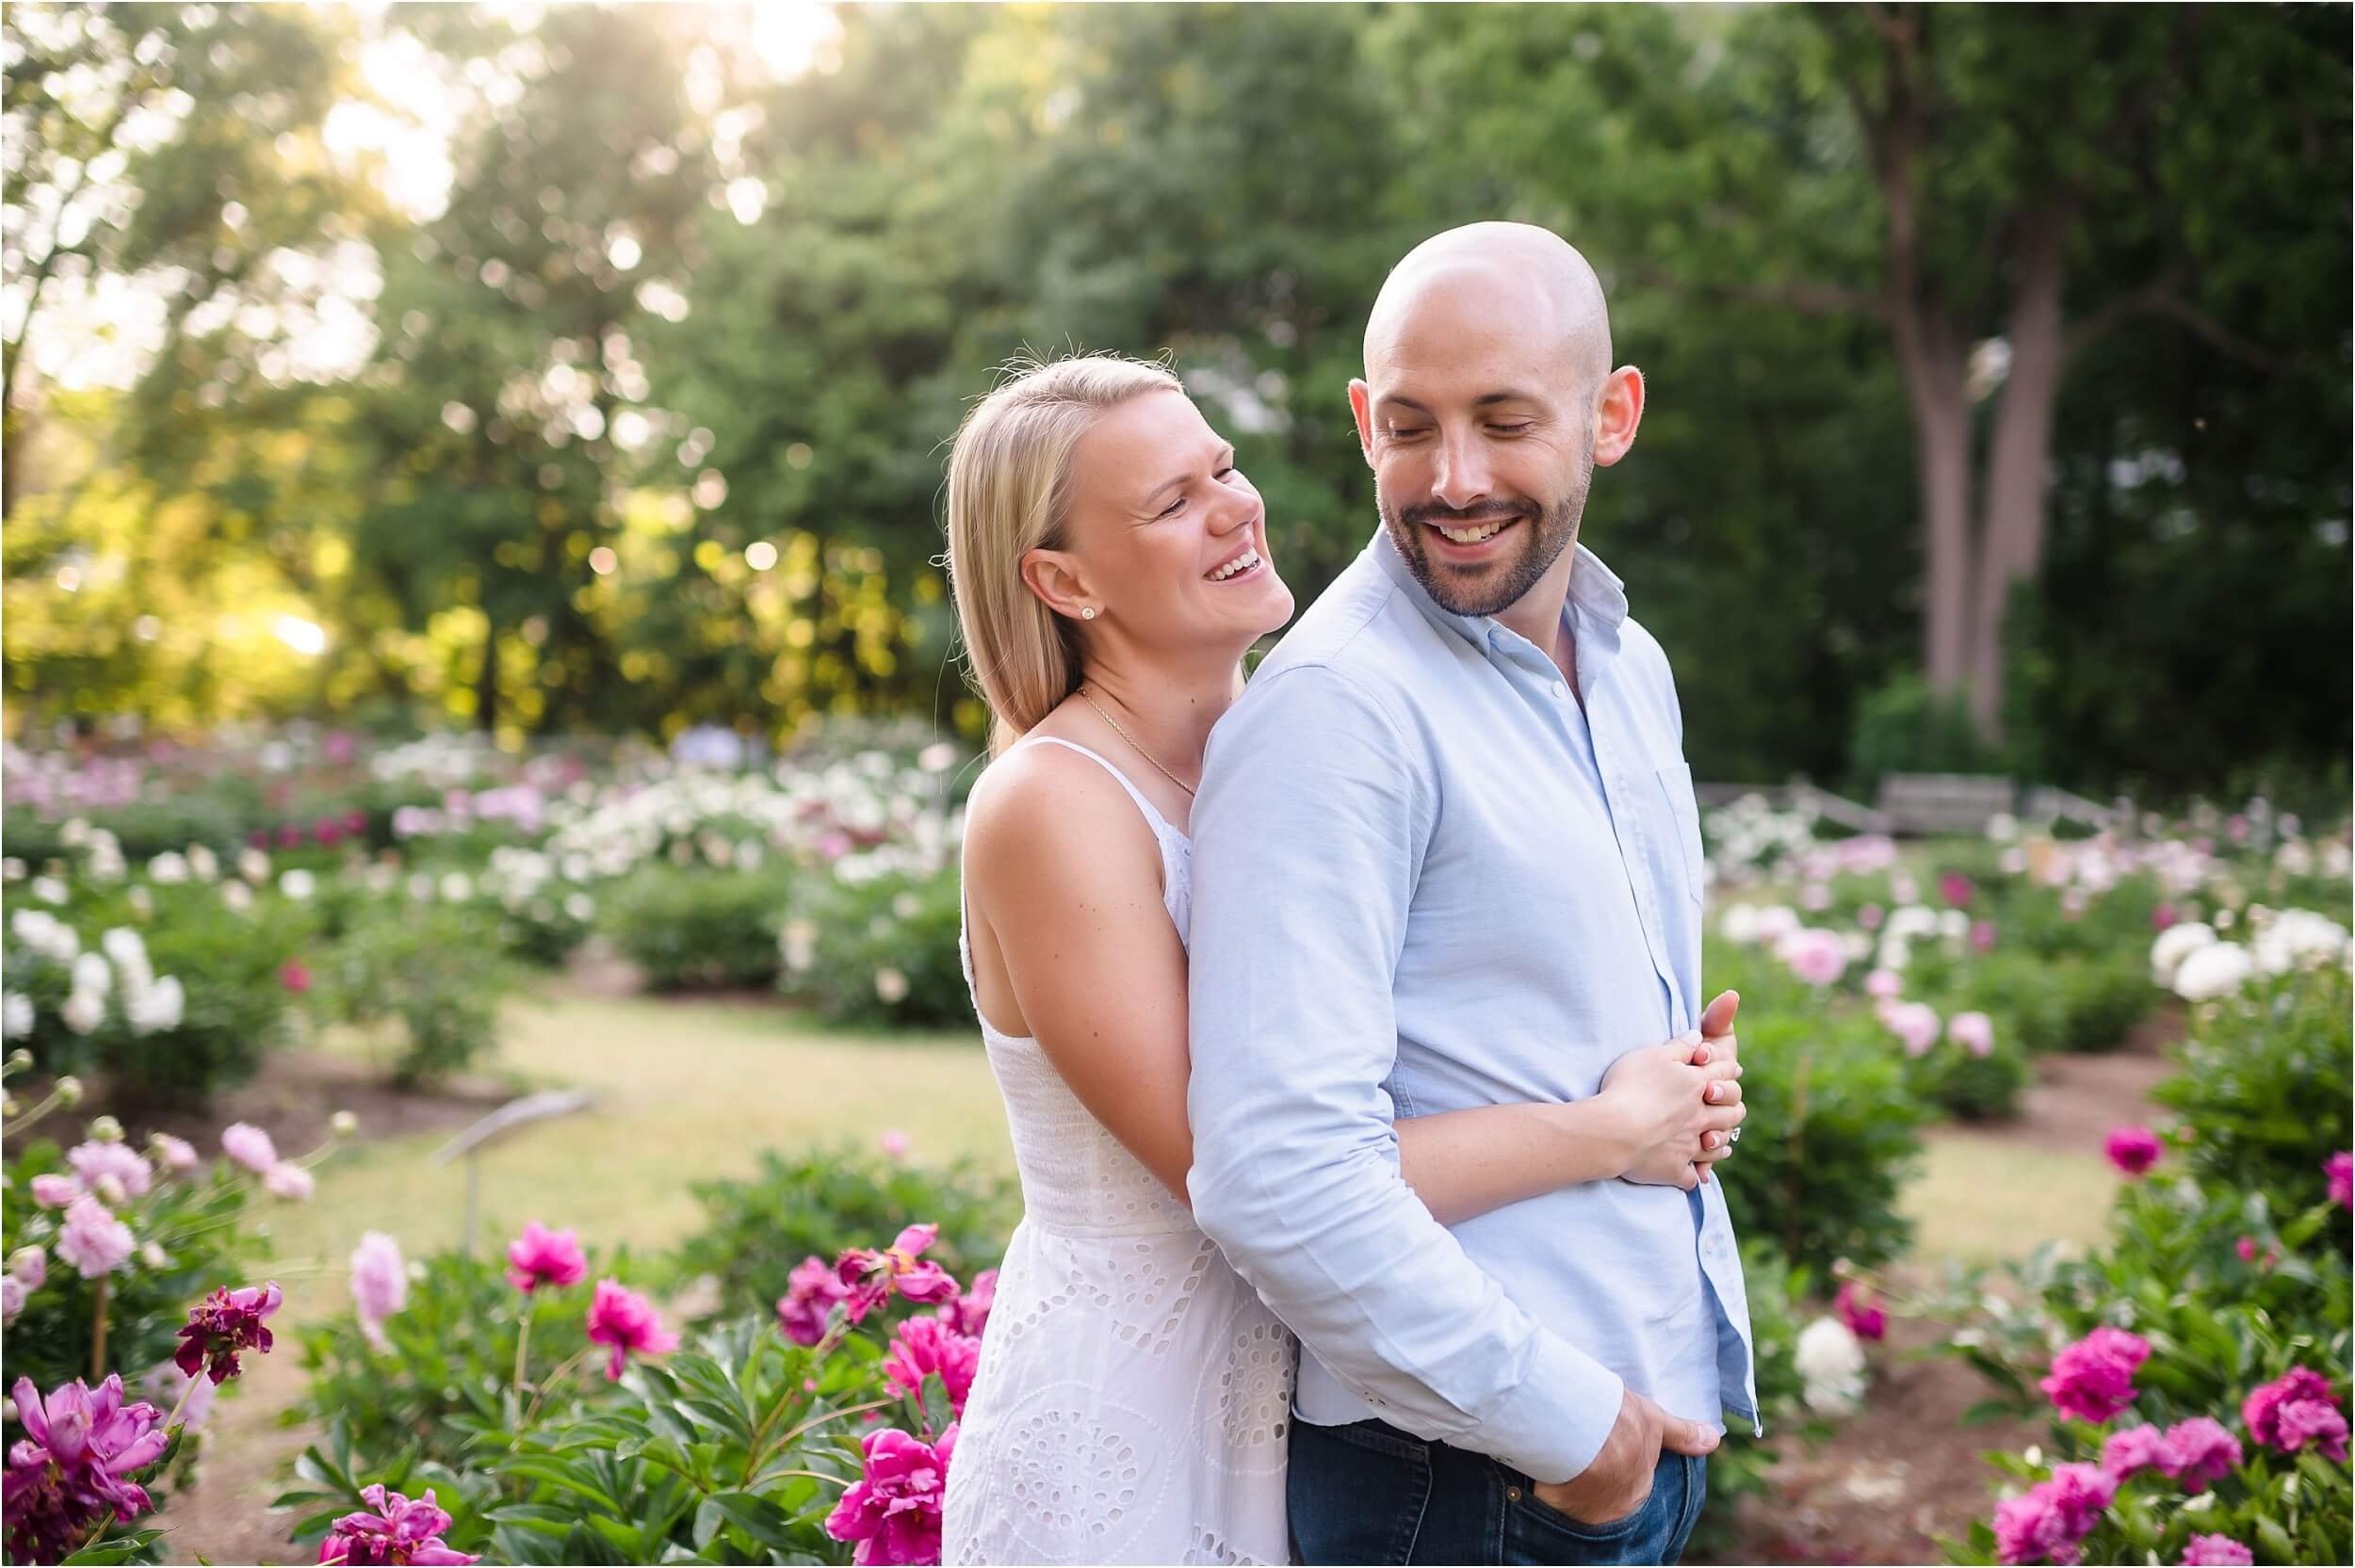  A bride sneaks up behind her soon-to-be husband during their engagement session.  